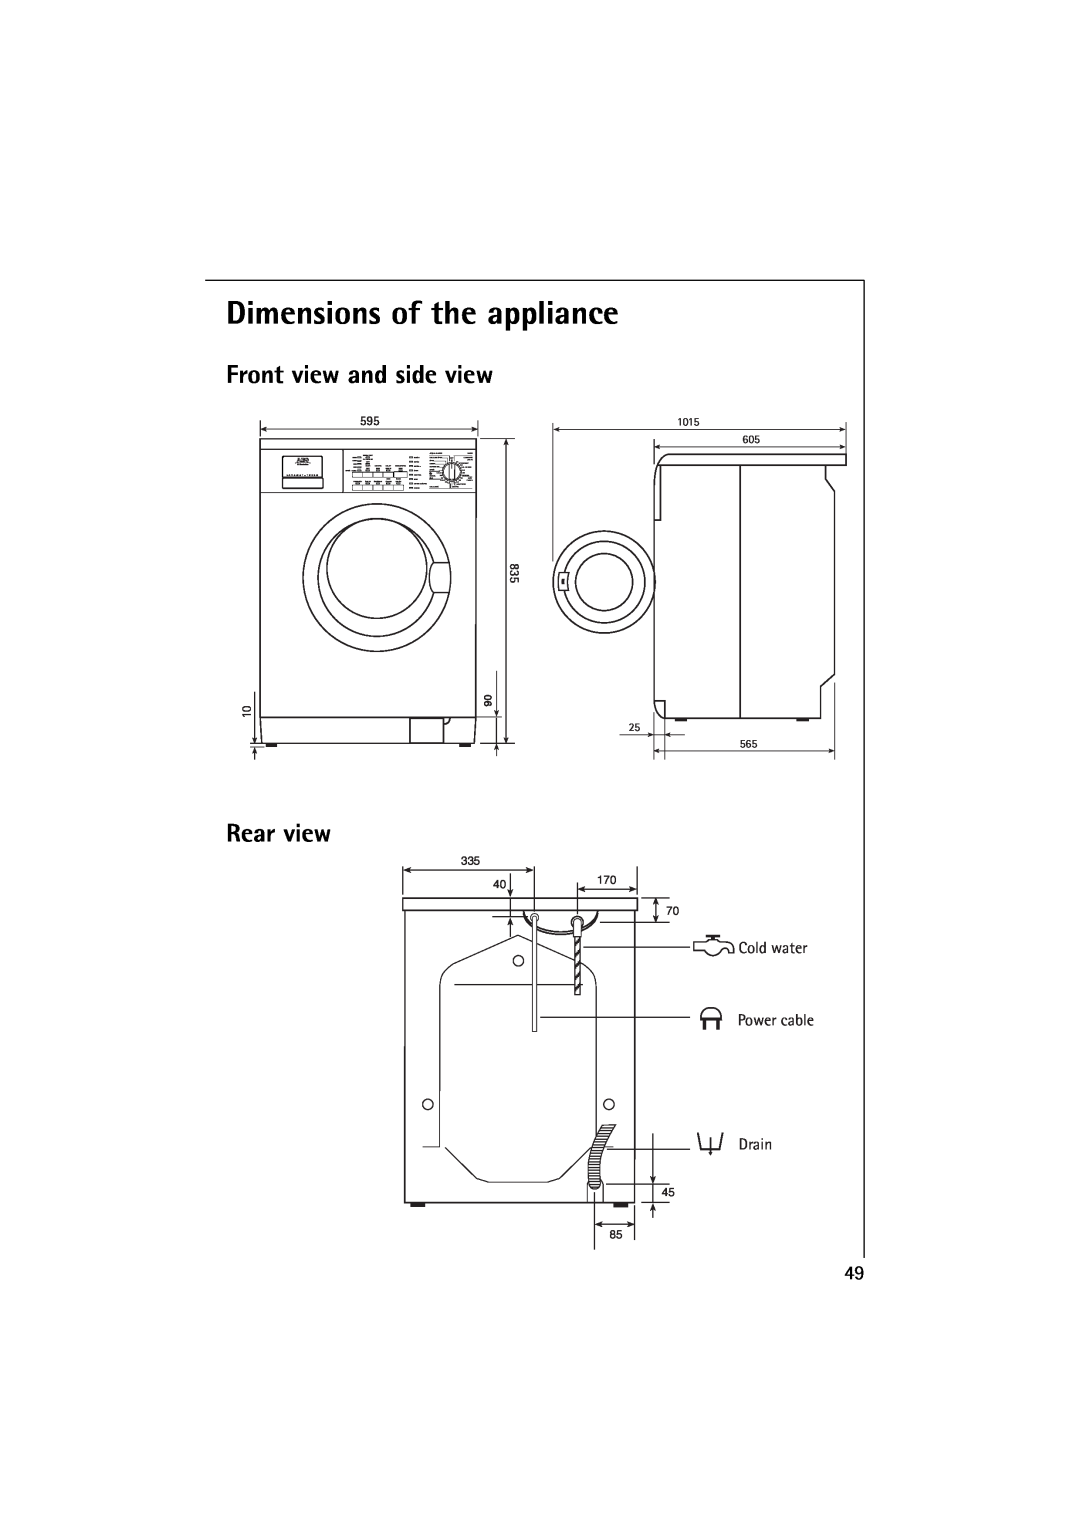 Electrolux 16830 manual Dimensions of the appliance, Front view and side view, Rear view 